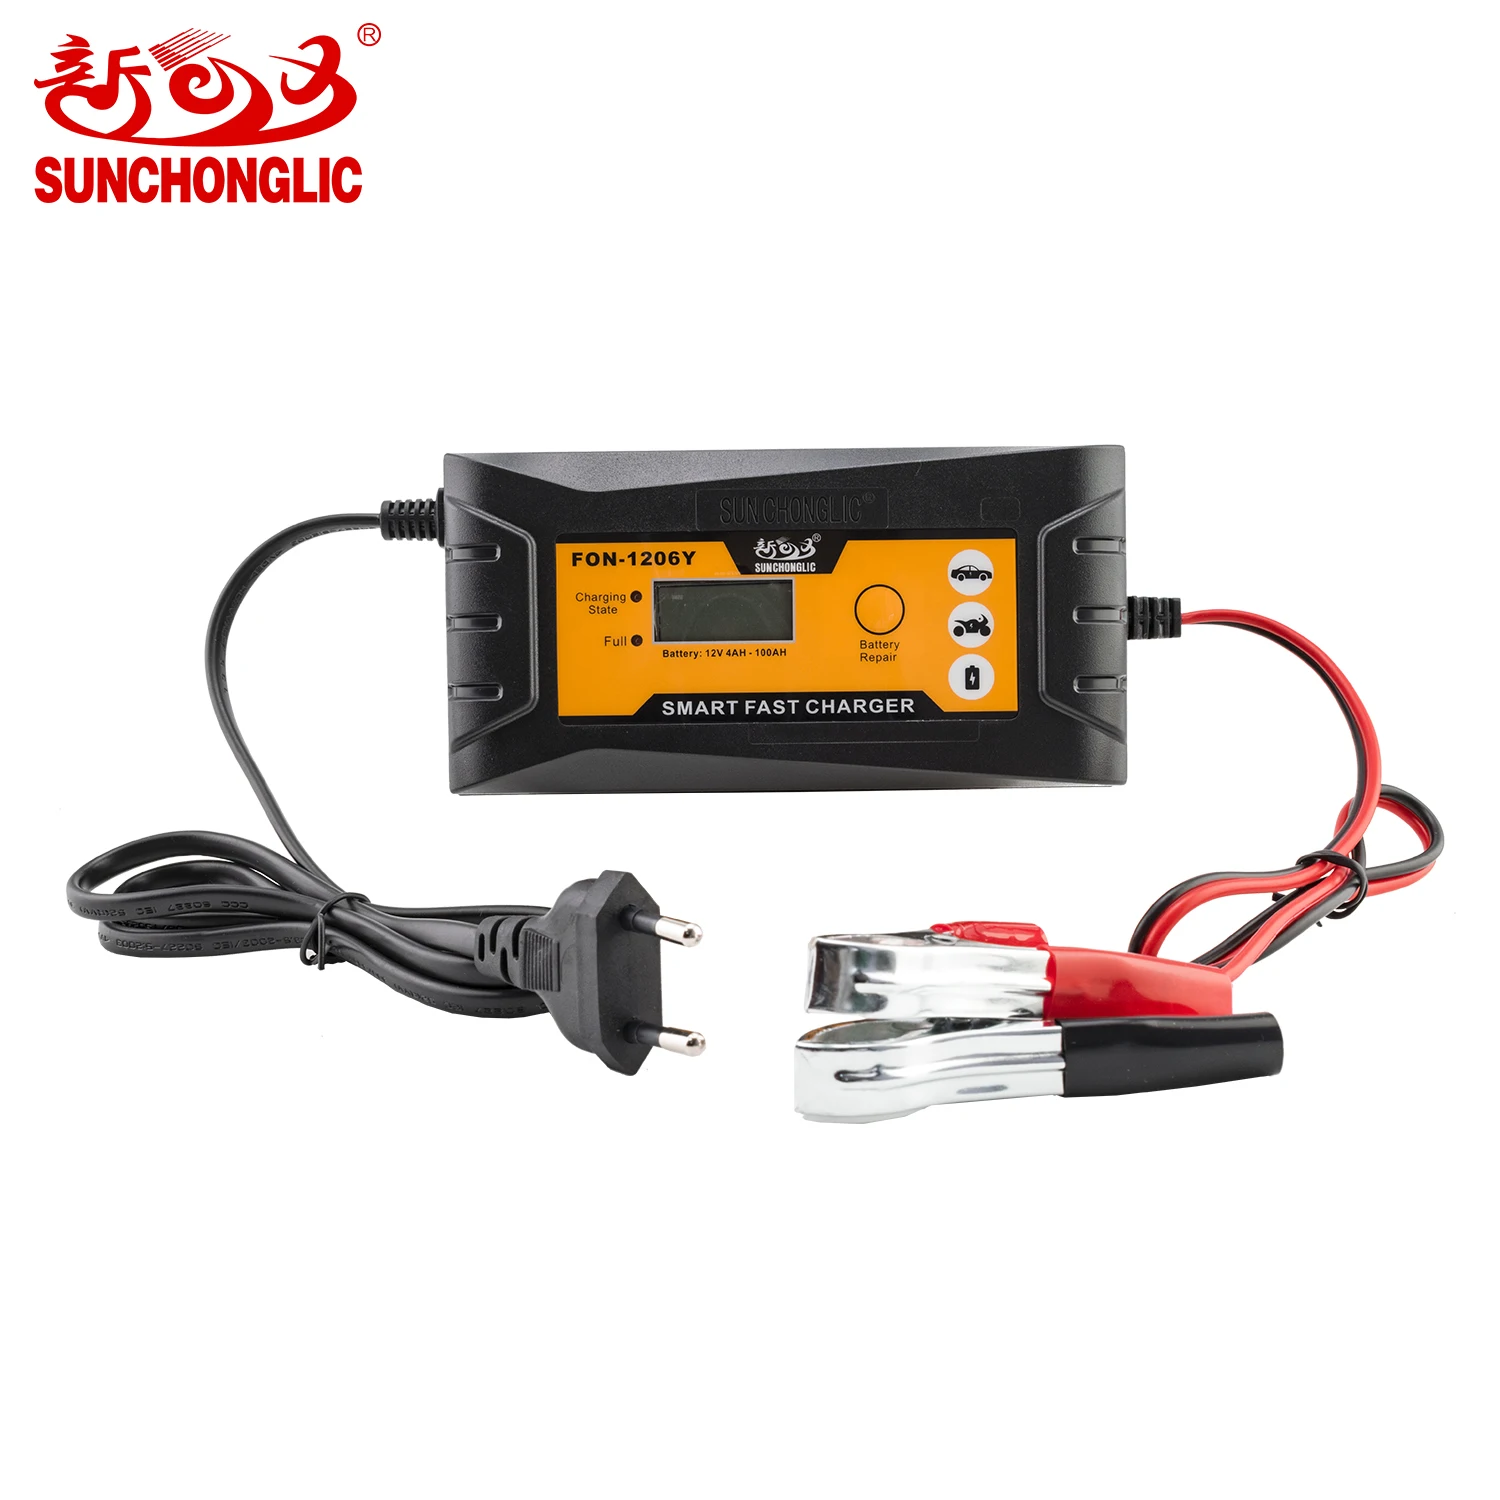 

Wholesales Sunchonglic Three Phase LCD Display 6A 12V AC to DC Lead Acid Battery with Car Smart Fast Battery Charger